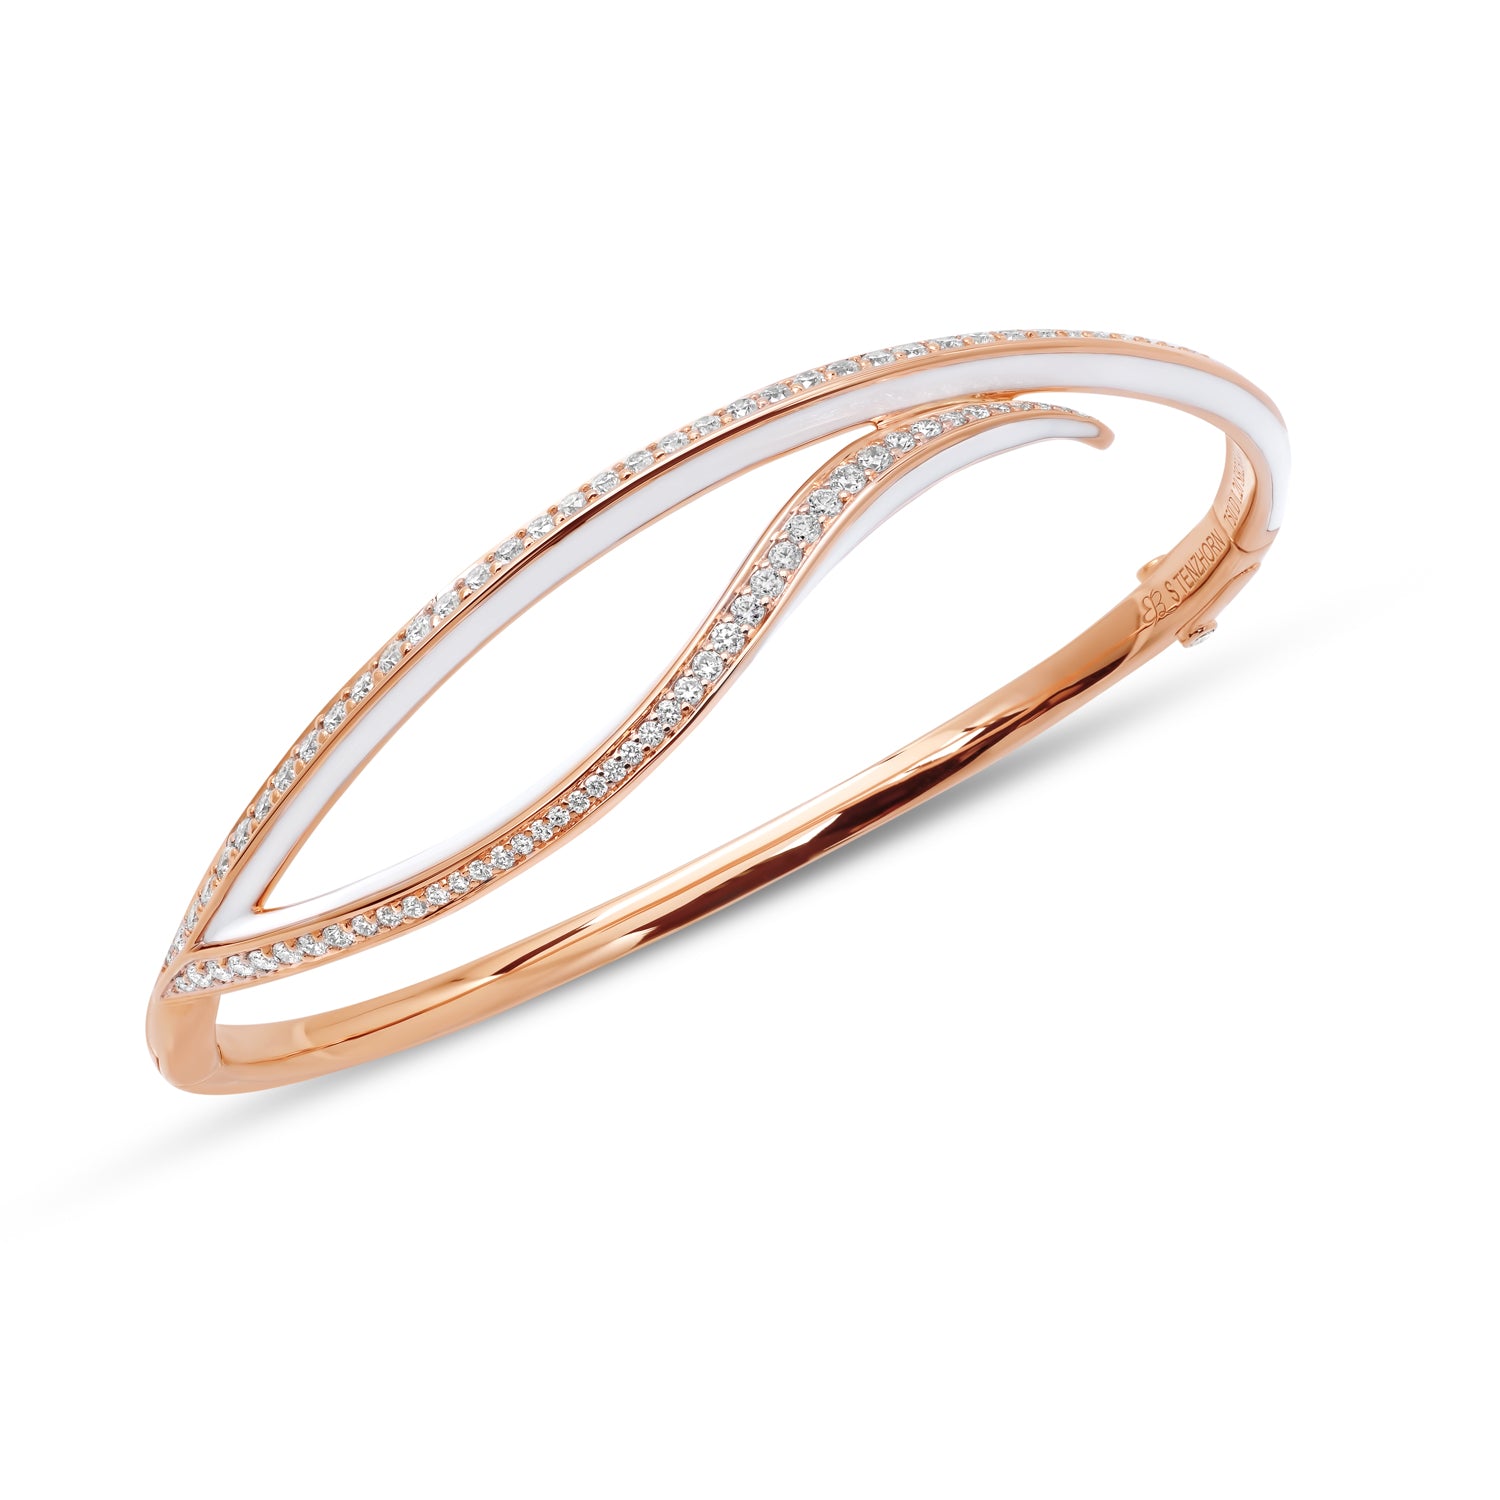 VIVA small Curved Bangle with Diamonds and White Enamel